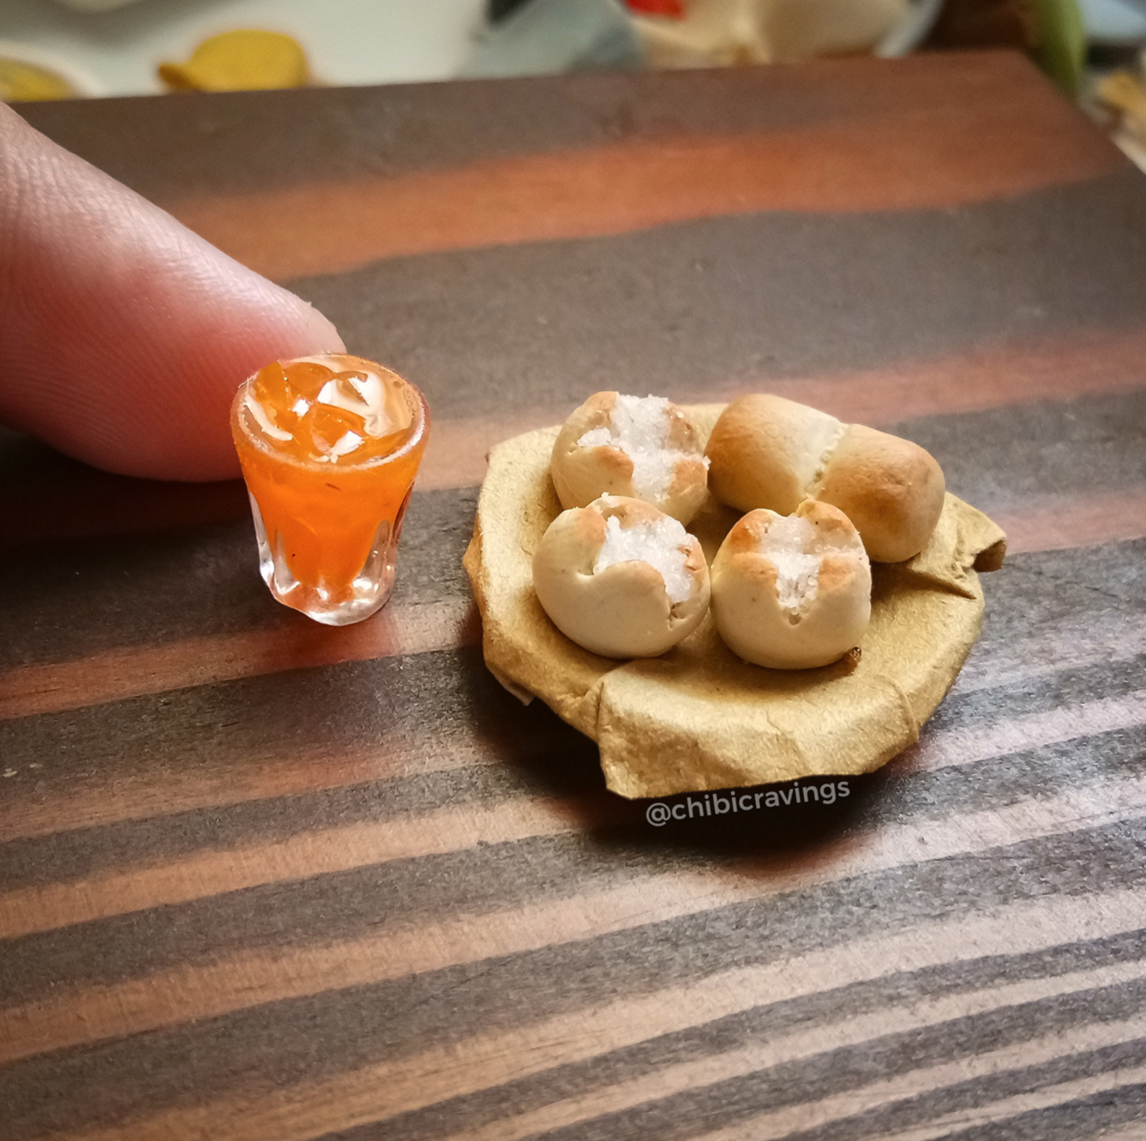 miniature pieces of bread and glass of orange juice